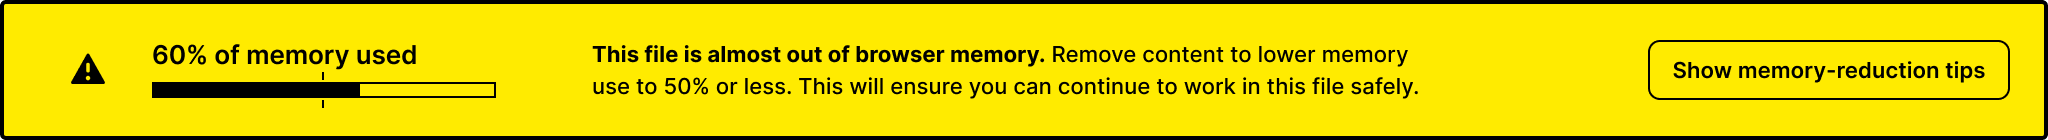 This file is almost out of browser memory. Remove content to lower memory use to 50% or less. This will ensure you can continue to work in this file safely.